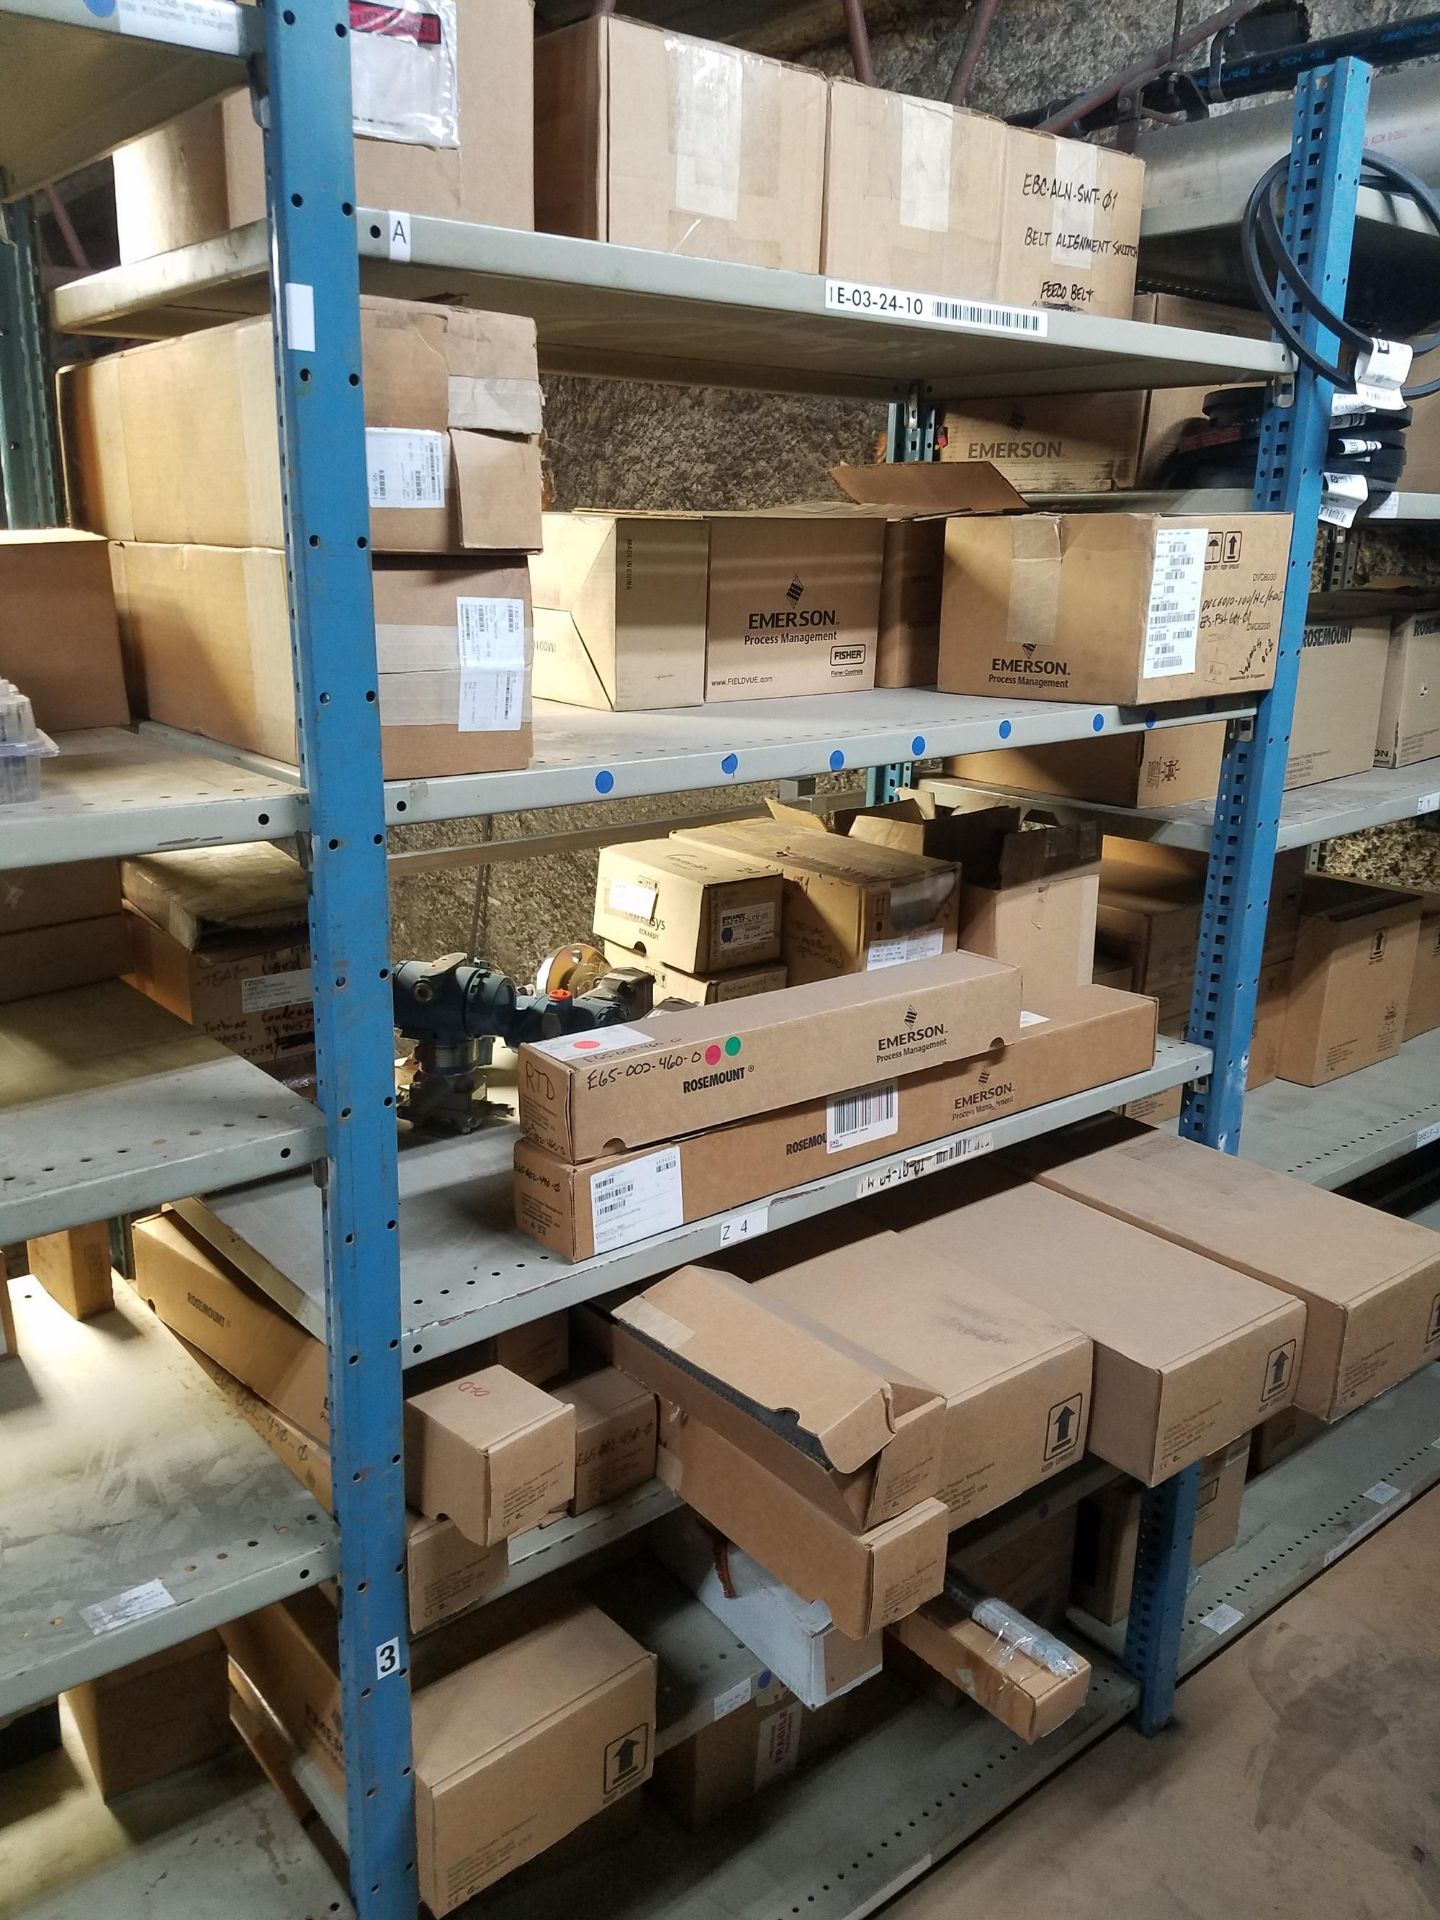 Contents of Spare Parts Storage Area On Mezzanine | Rig Fee: $400 - Image 8 of 19